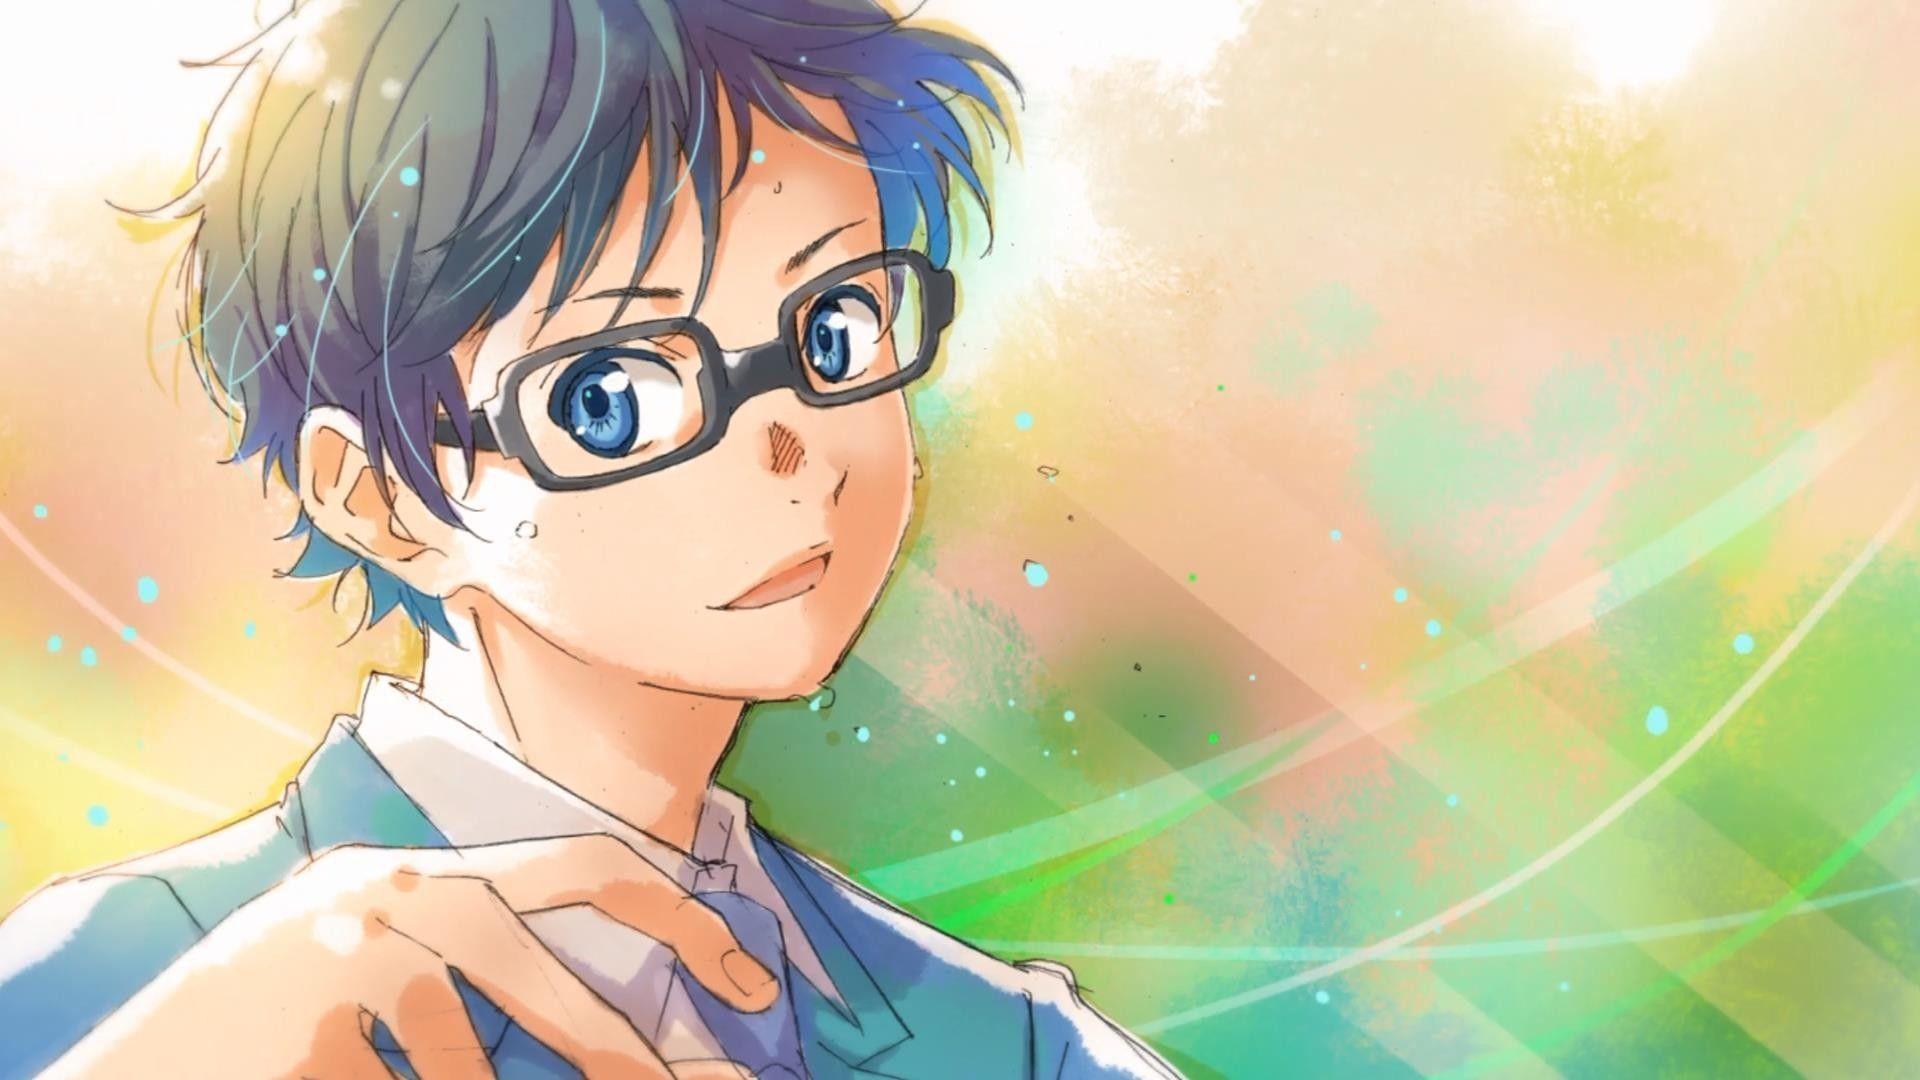 Your Lie In April Best Wallpaper Hd For Pc, Your Lie In April, Anime